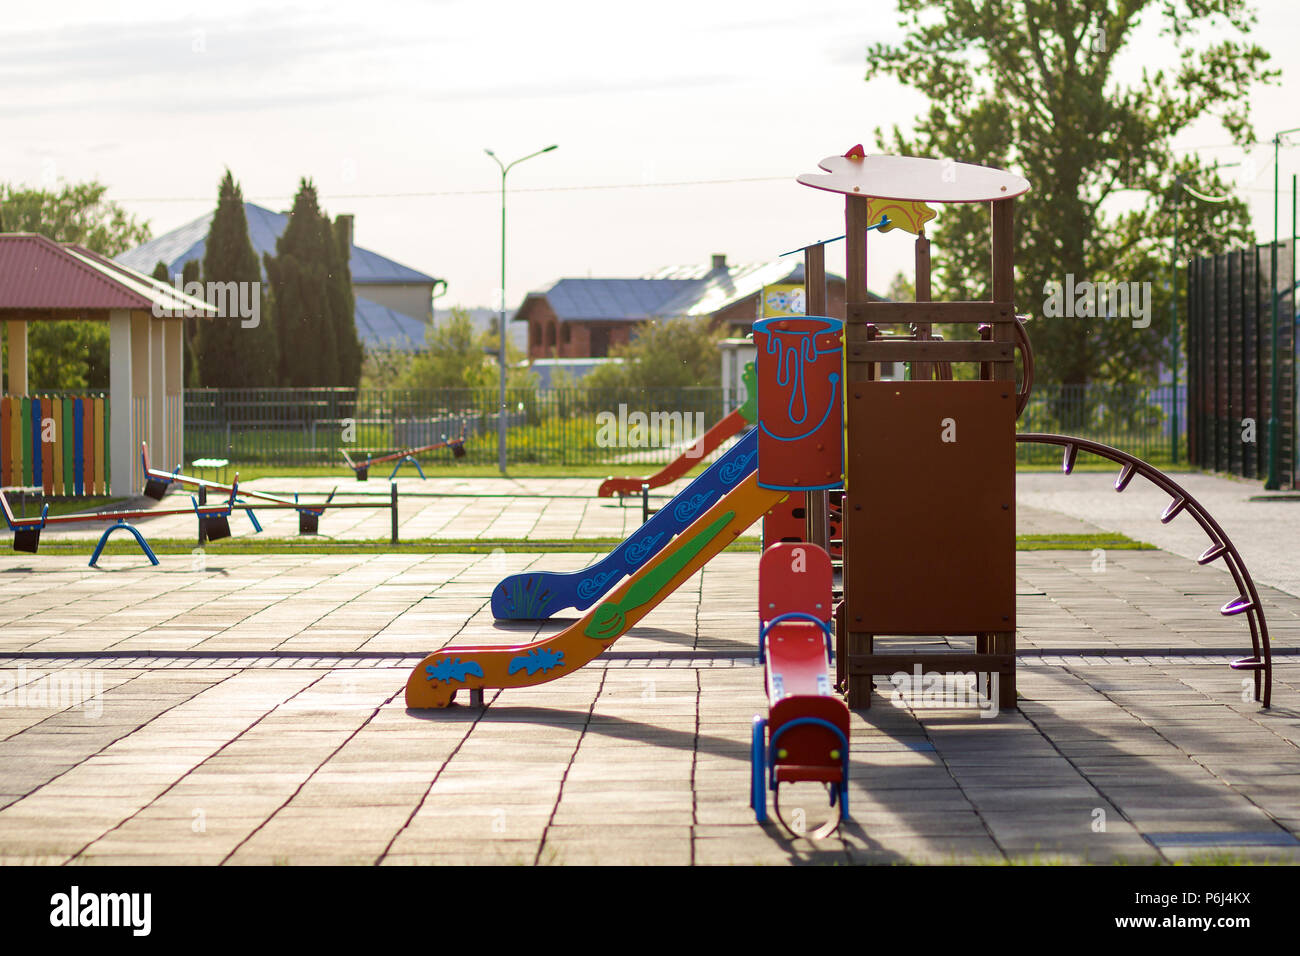 Beautiful playground in kindergarten with bright new alcove with red tile roof and multicolored low fence, green lawn, swings, slides and sandbox. Per Stock Photo